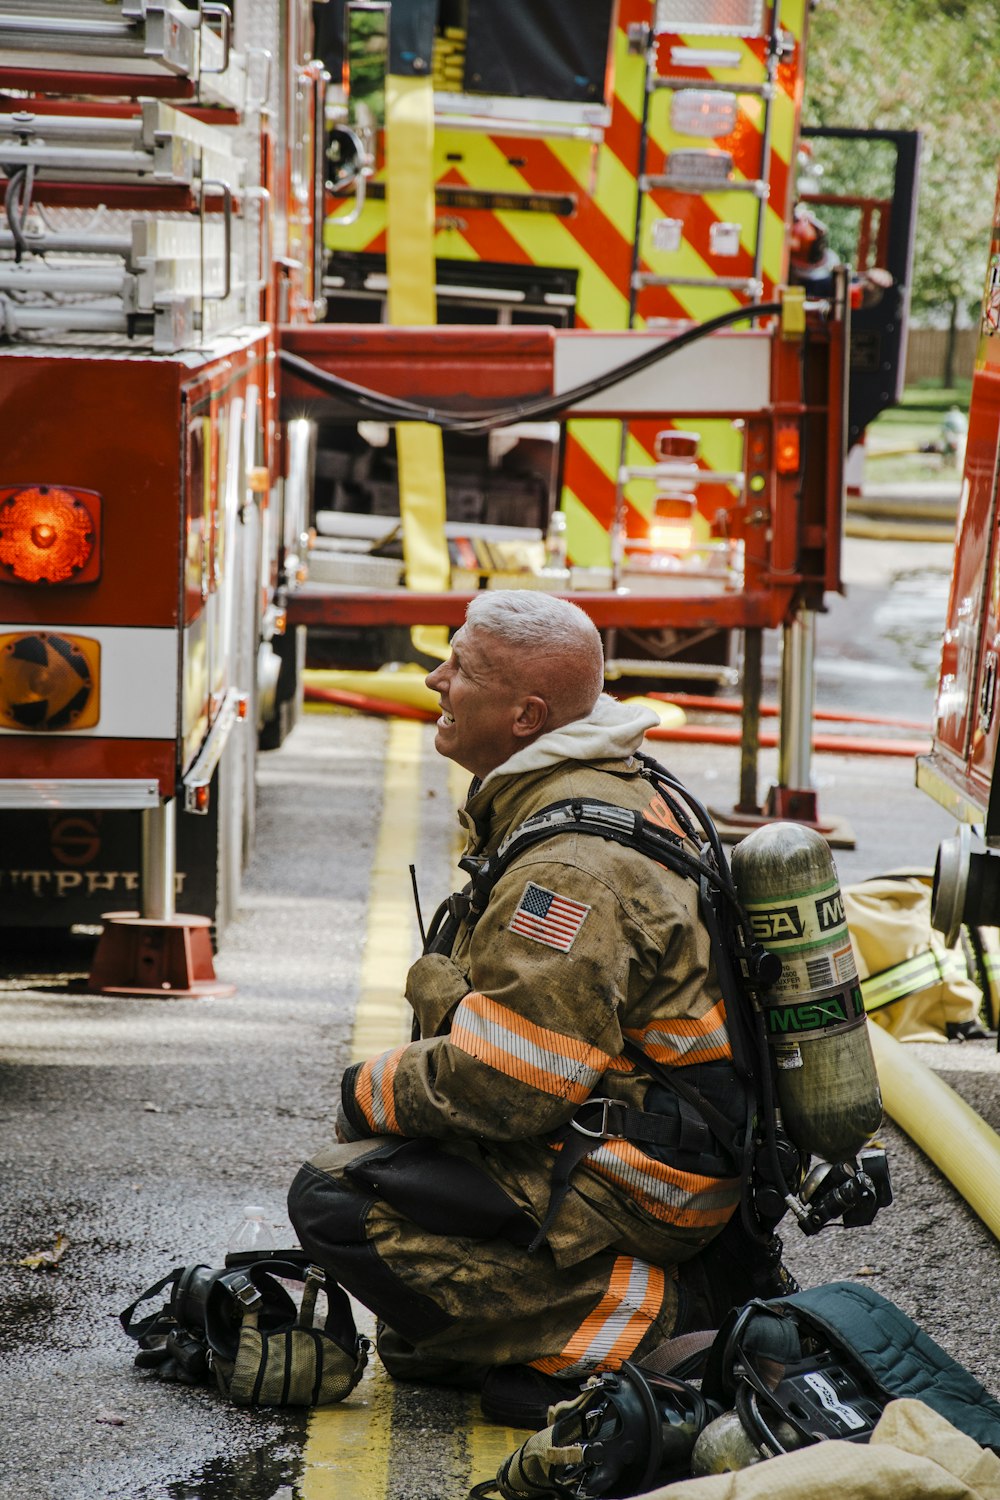 a fireman sitting on the ground next to a fire truck